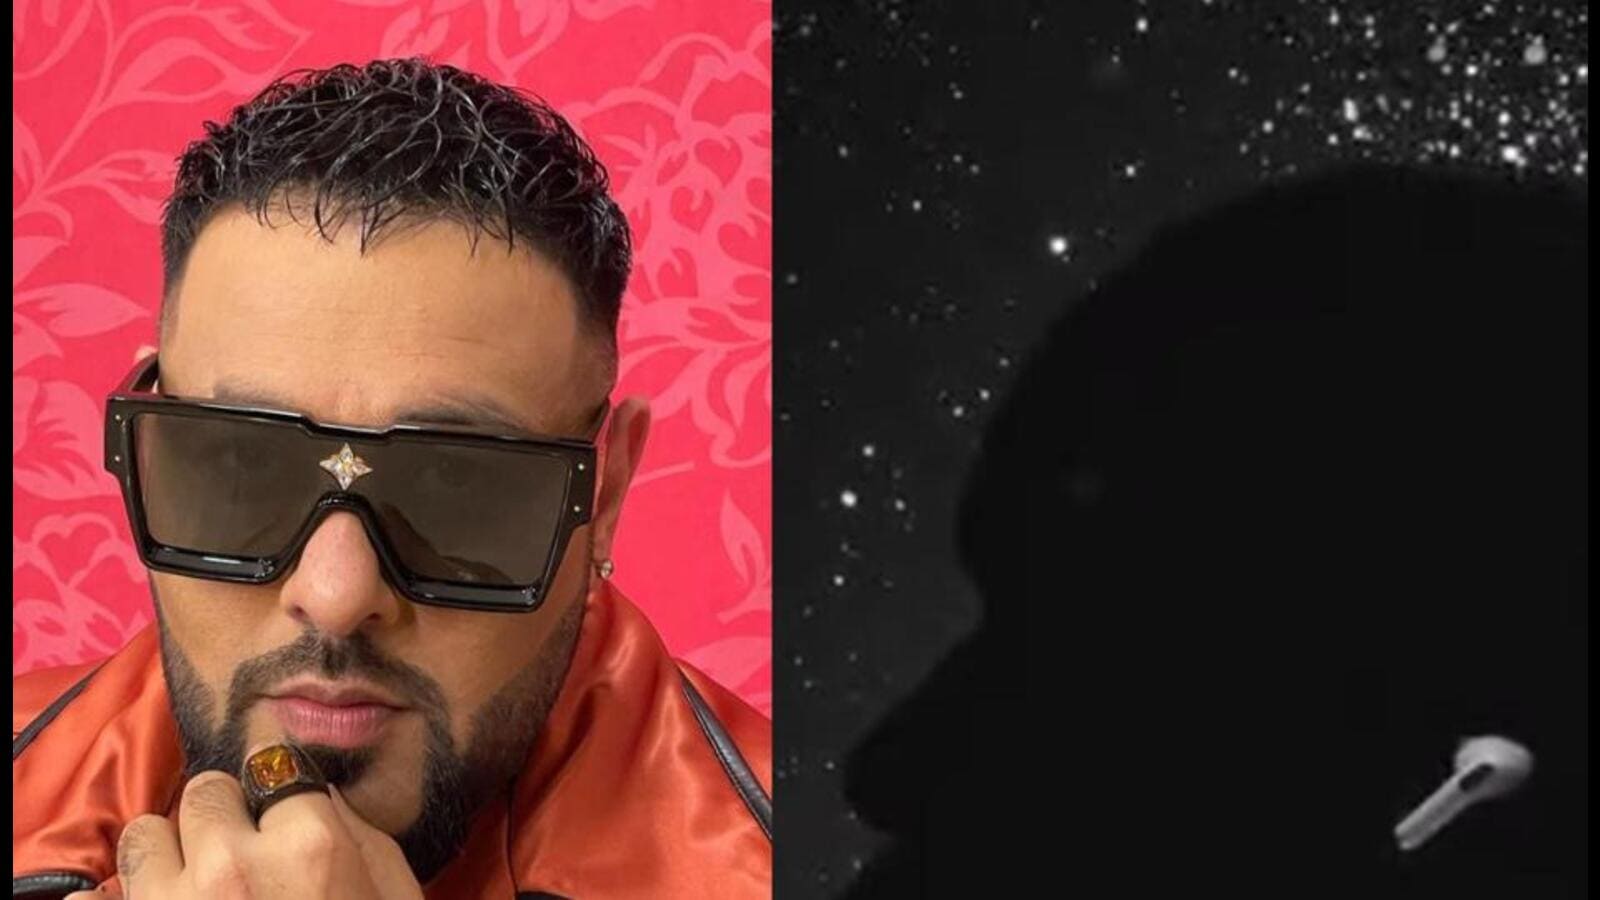 Exclusive || Badshah on Apple using Voodoo song at Far Out event: Happy to see the song cross over